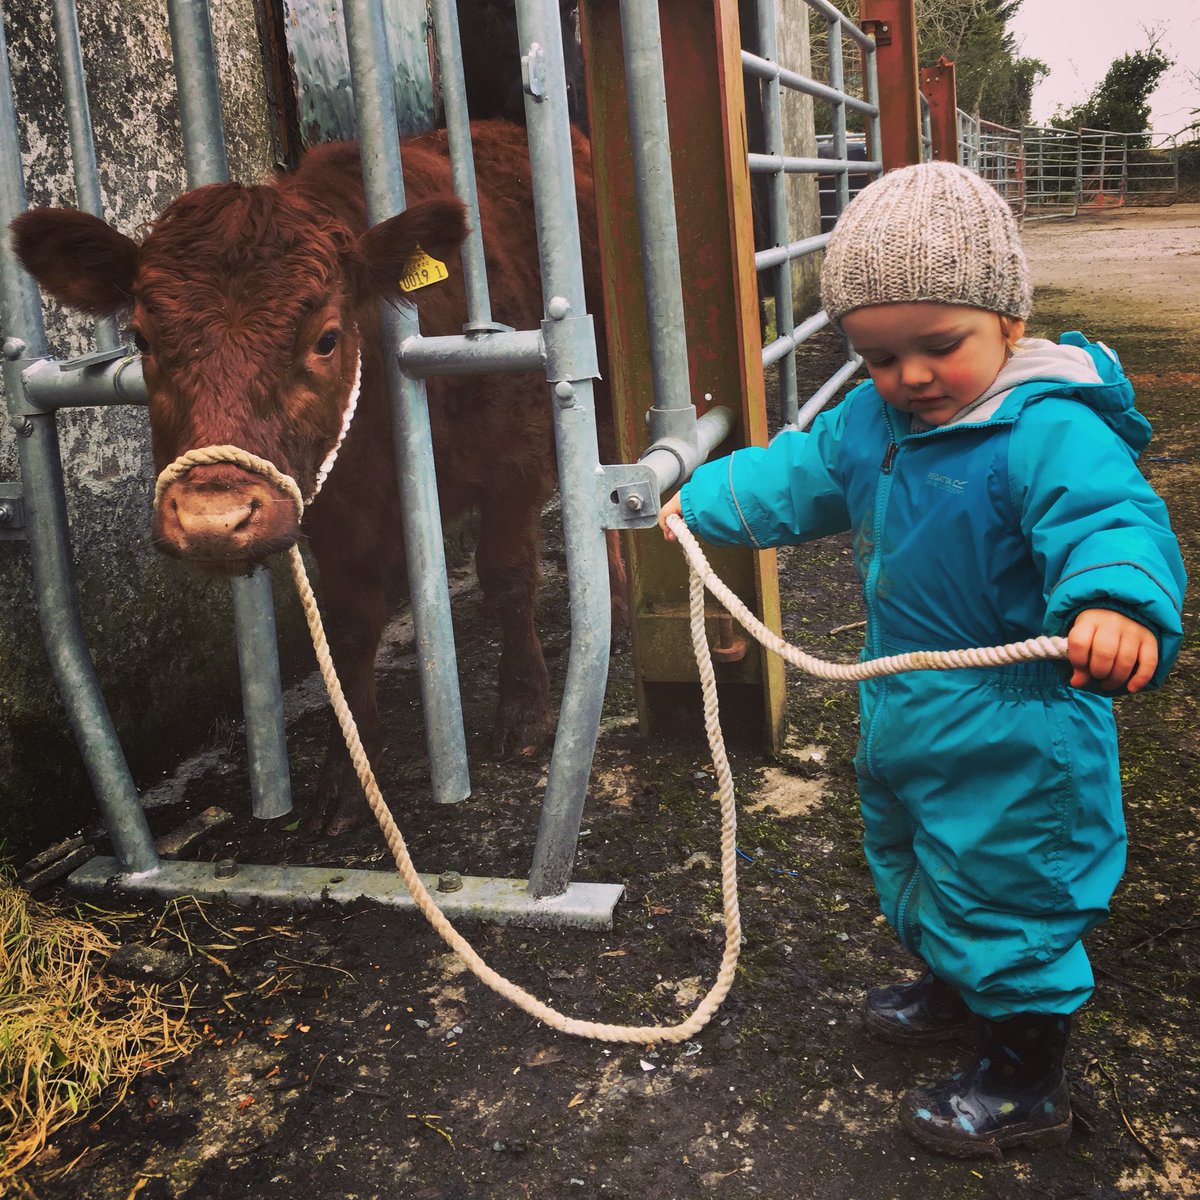 Not sure who is less convinced about learning the ropes here......Crimson or the wee man. #startthemyoung #dextercattle #donaghadee